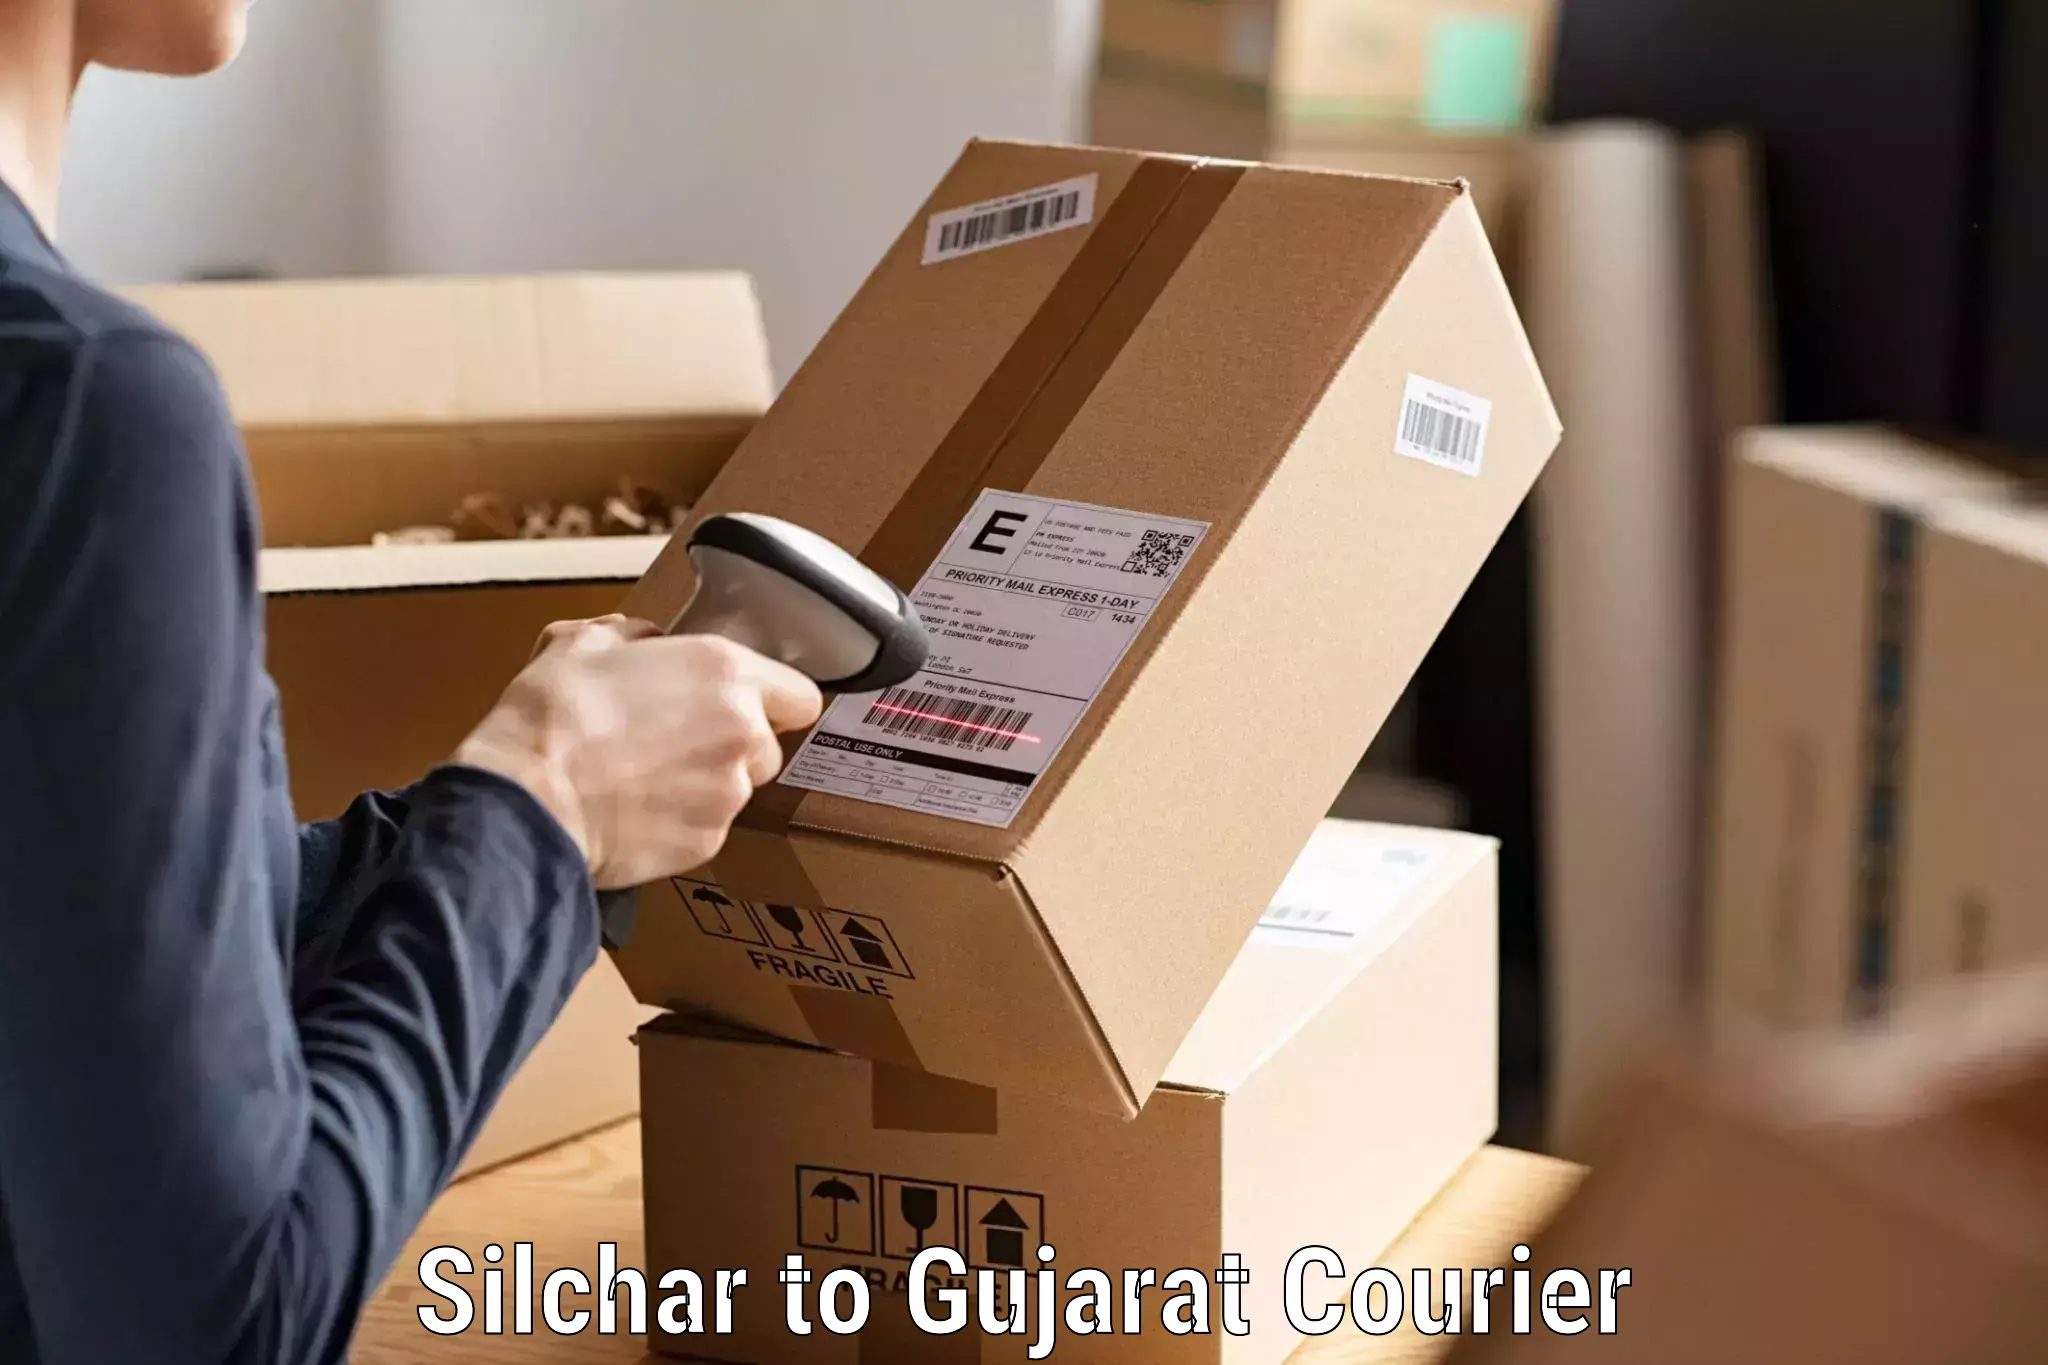 Professional courier handling Silchar to Veraval